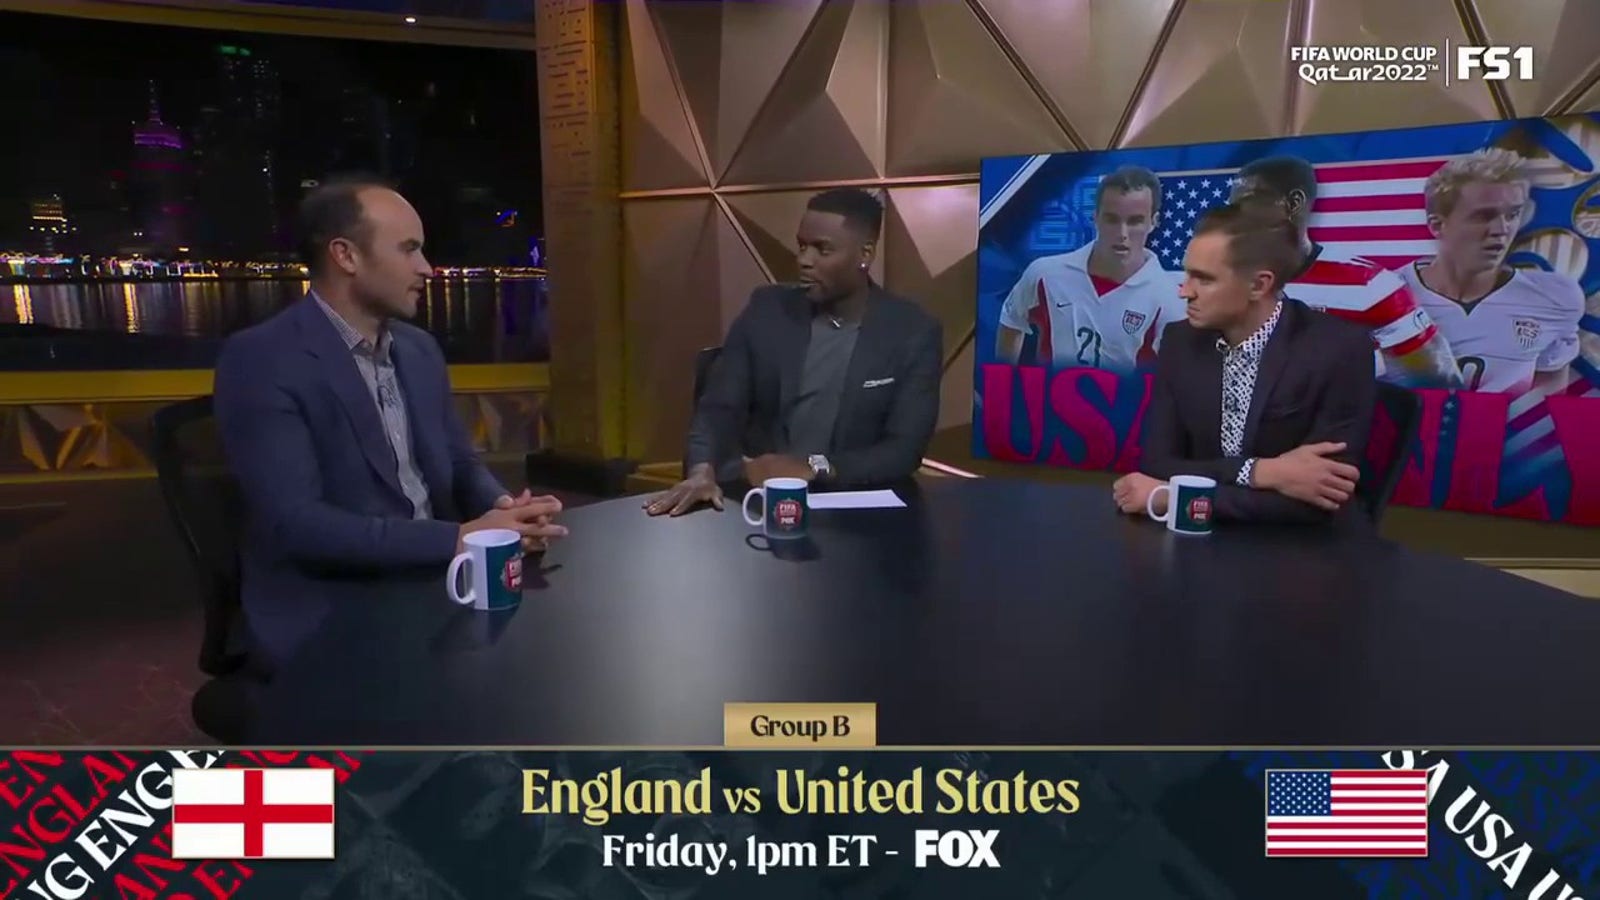 England vs United States preview: What's the USMNT's best game plan?